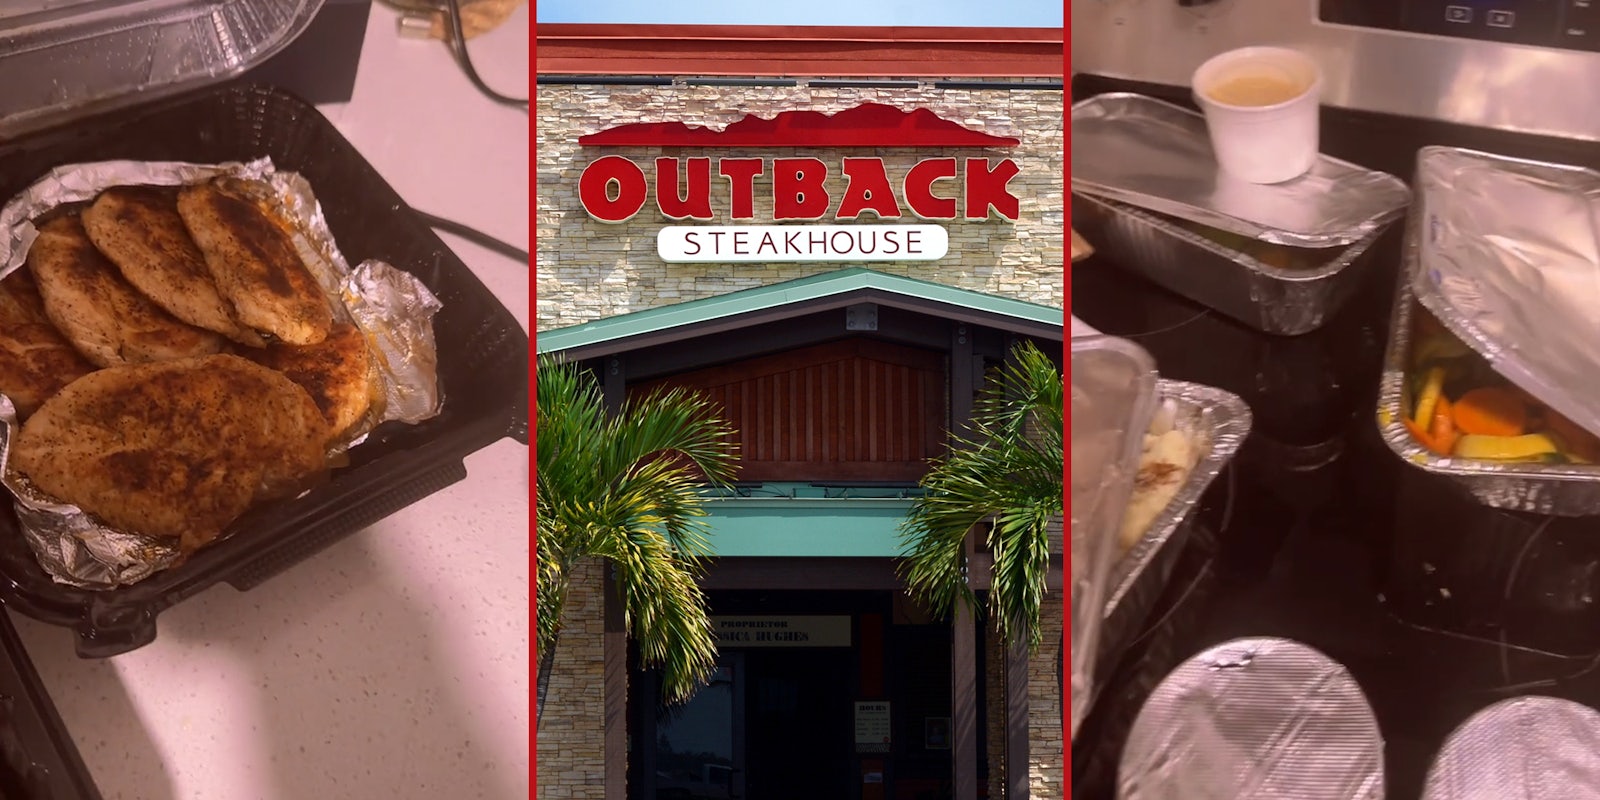 Woman orders ‘Outback Bundle’ from Outback Steakhouse, gets more than she bargained for